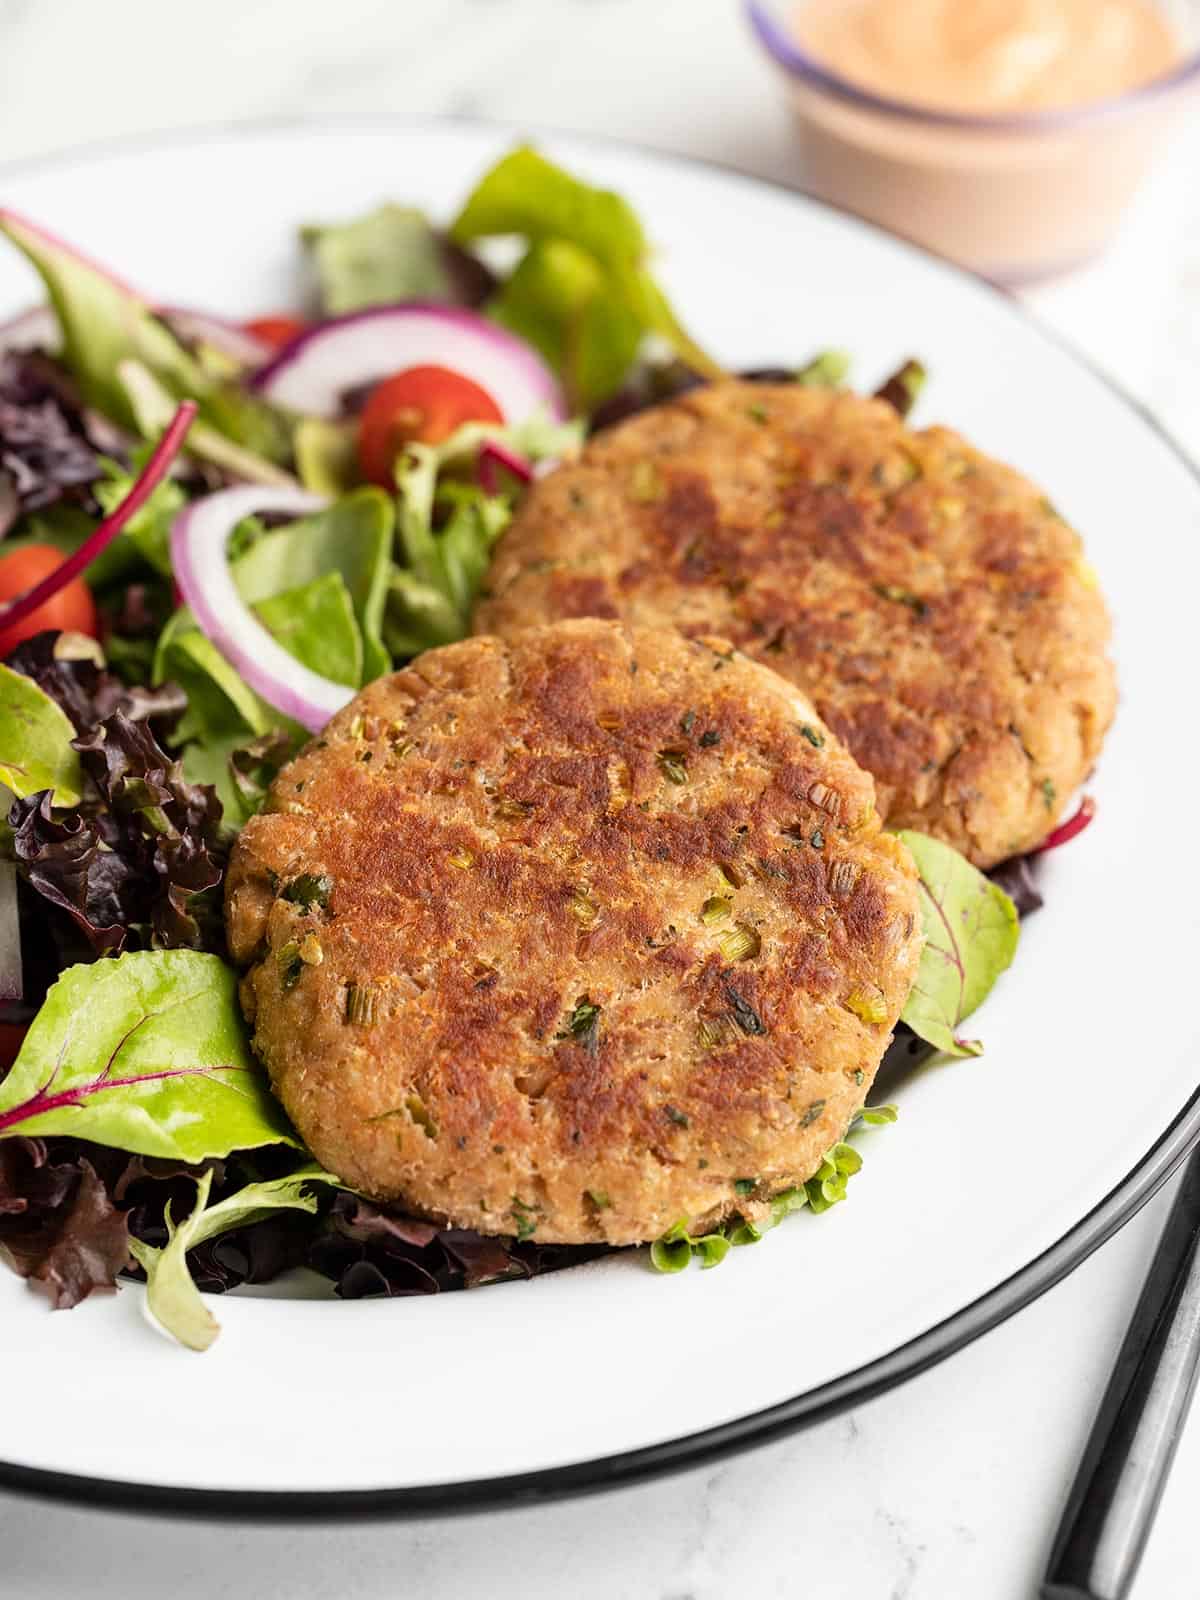 Side view of two tuna cakes on a plate of greens.